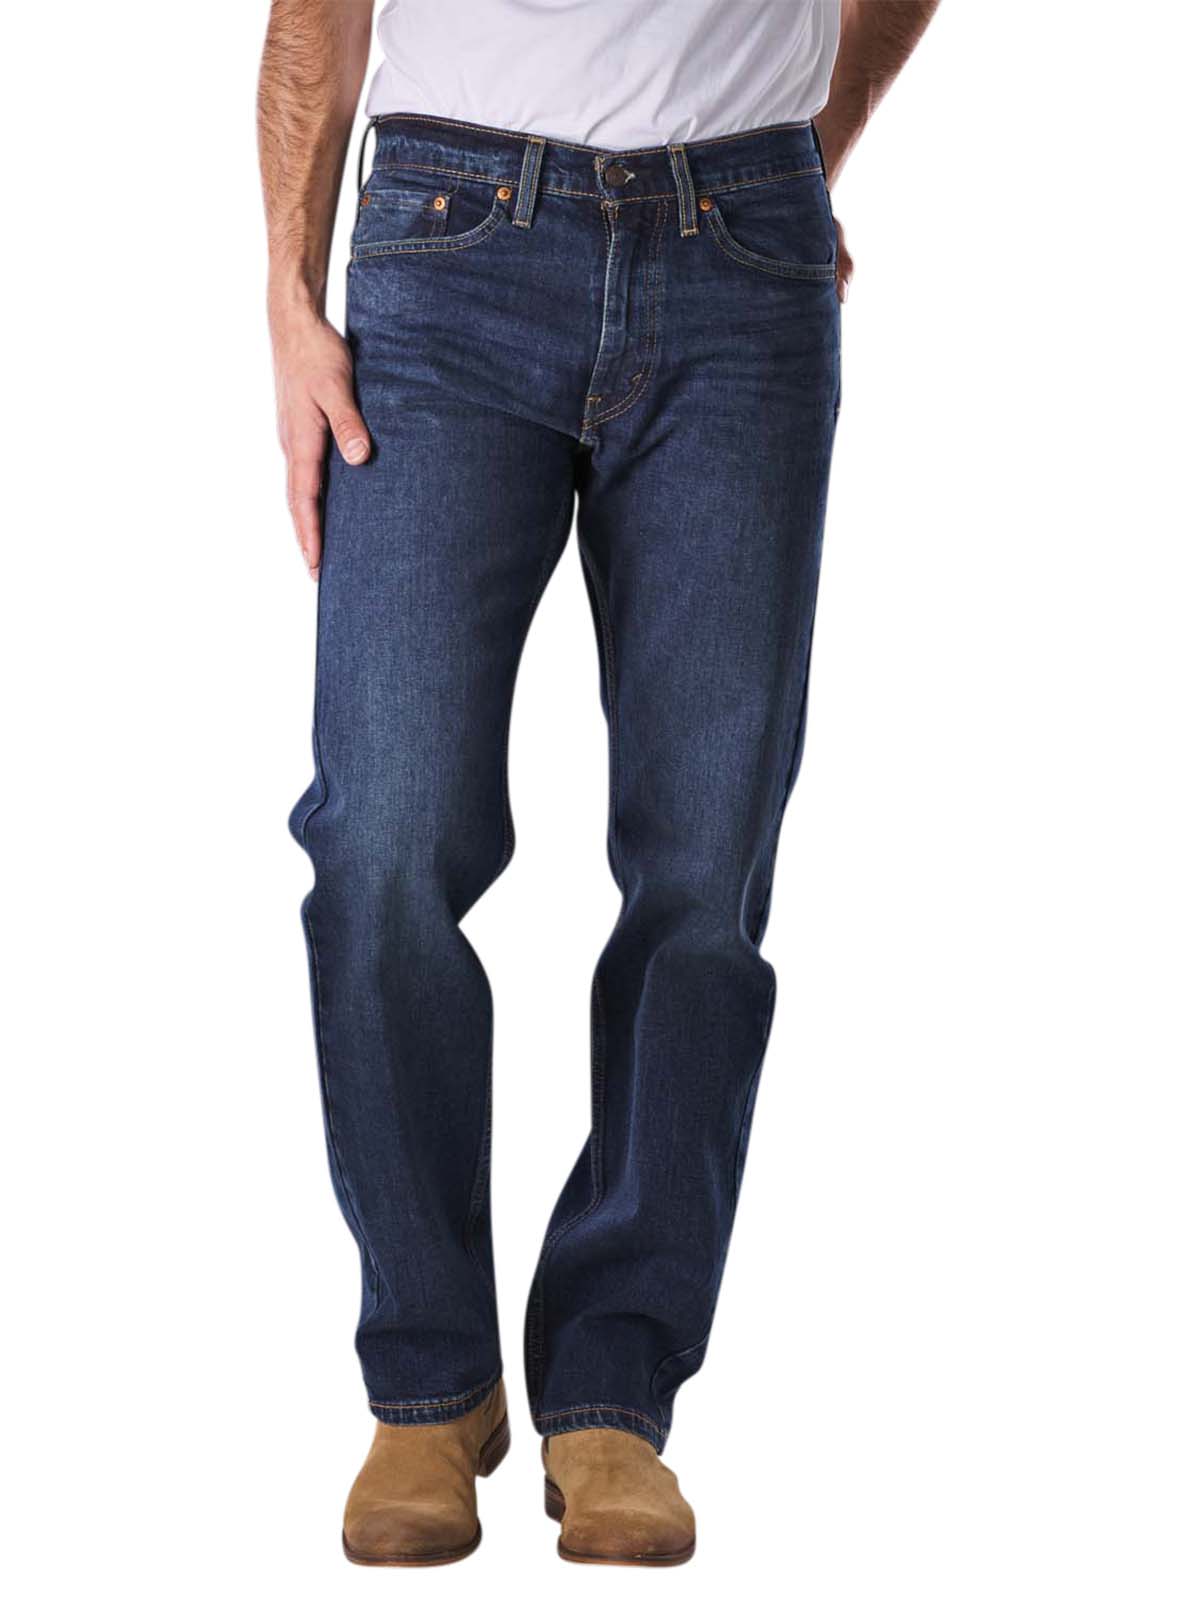 Levi's 505 Jeans Straight Fit flying bird Levi's Men's Jeans | Free  Shipping on  - SIMPLY LOOK GOOD